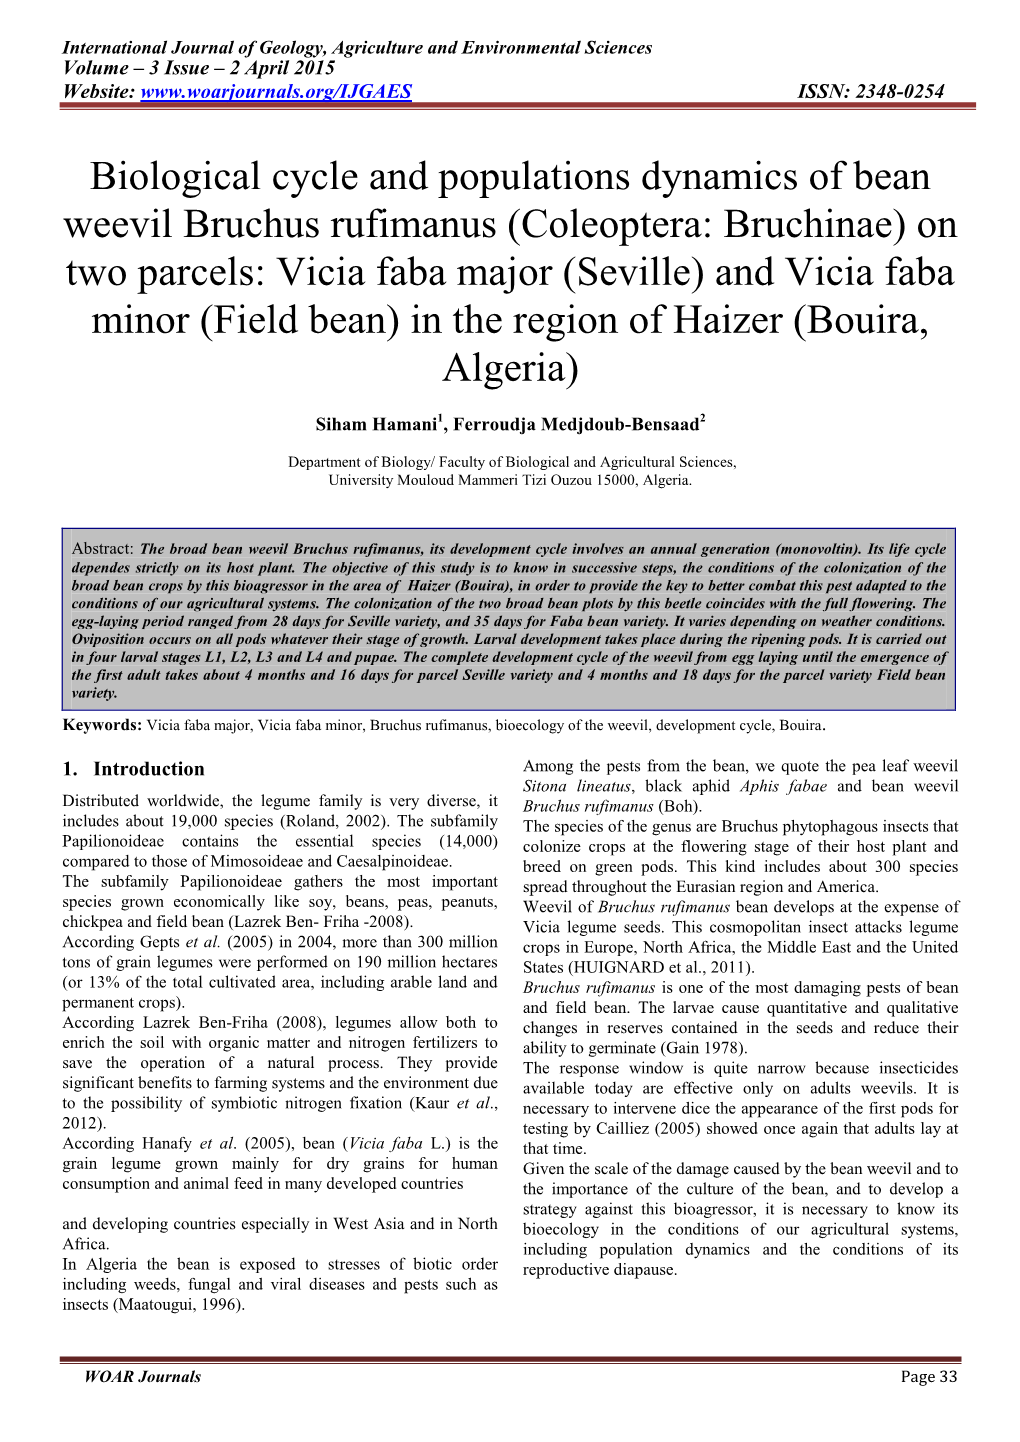 Biological Cycle and Populations Dynamics of Bean Weevil Bruchus